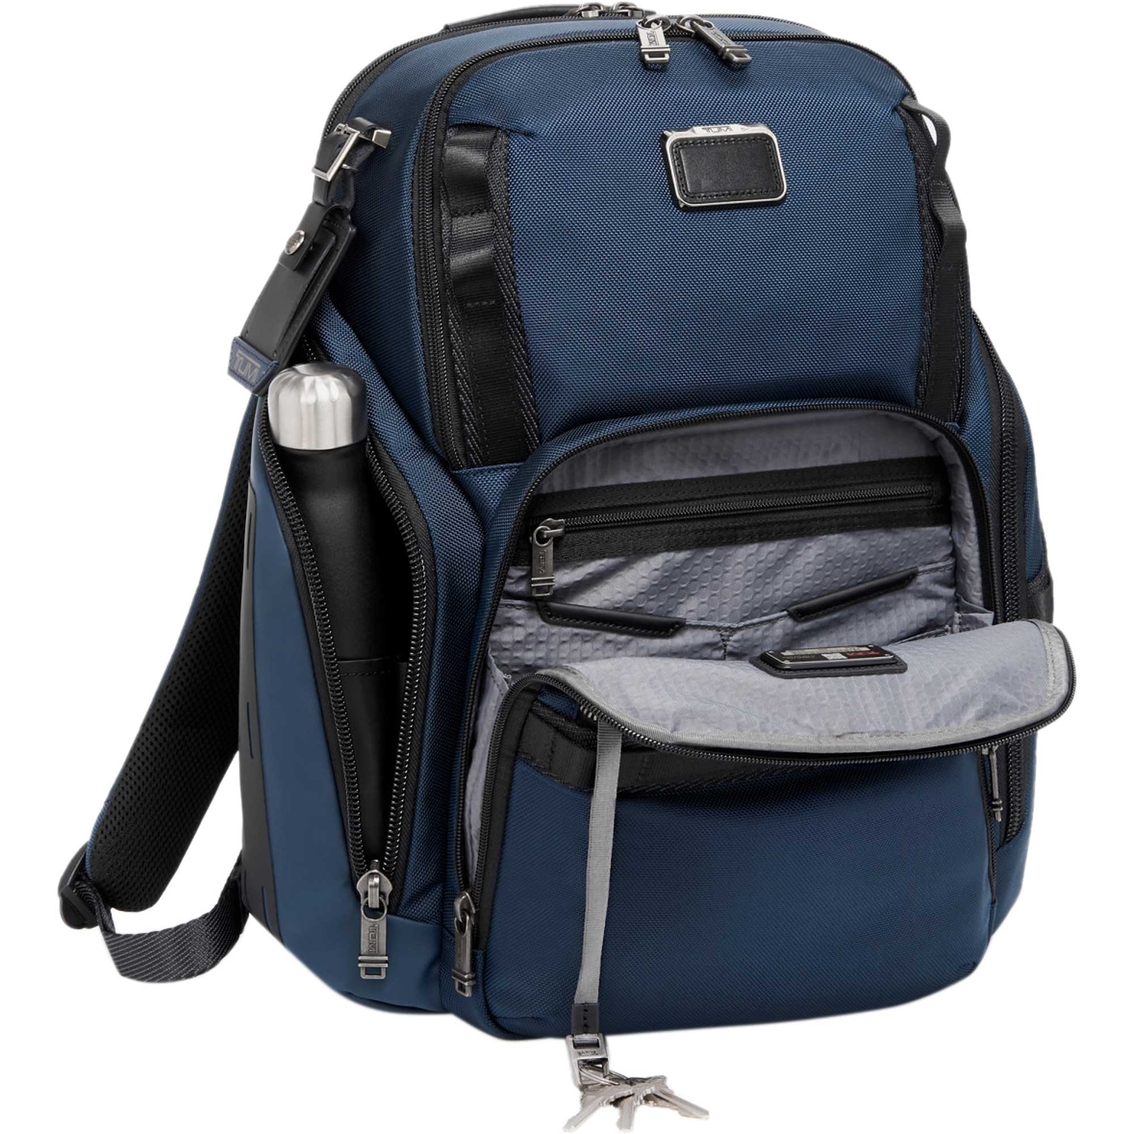 Tumi Search Backpack, Navy - Image 5 of 6